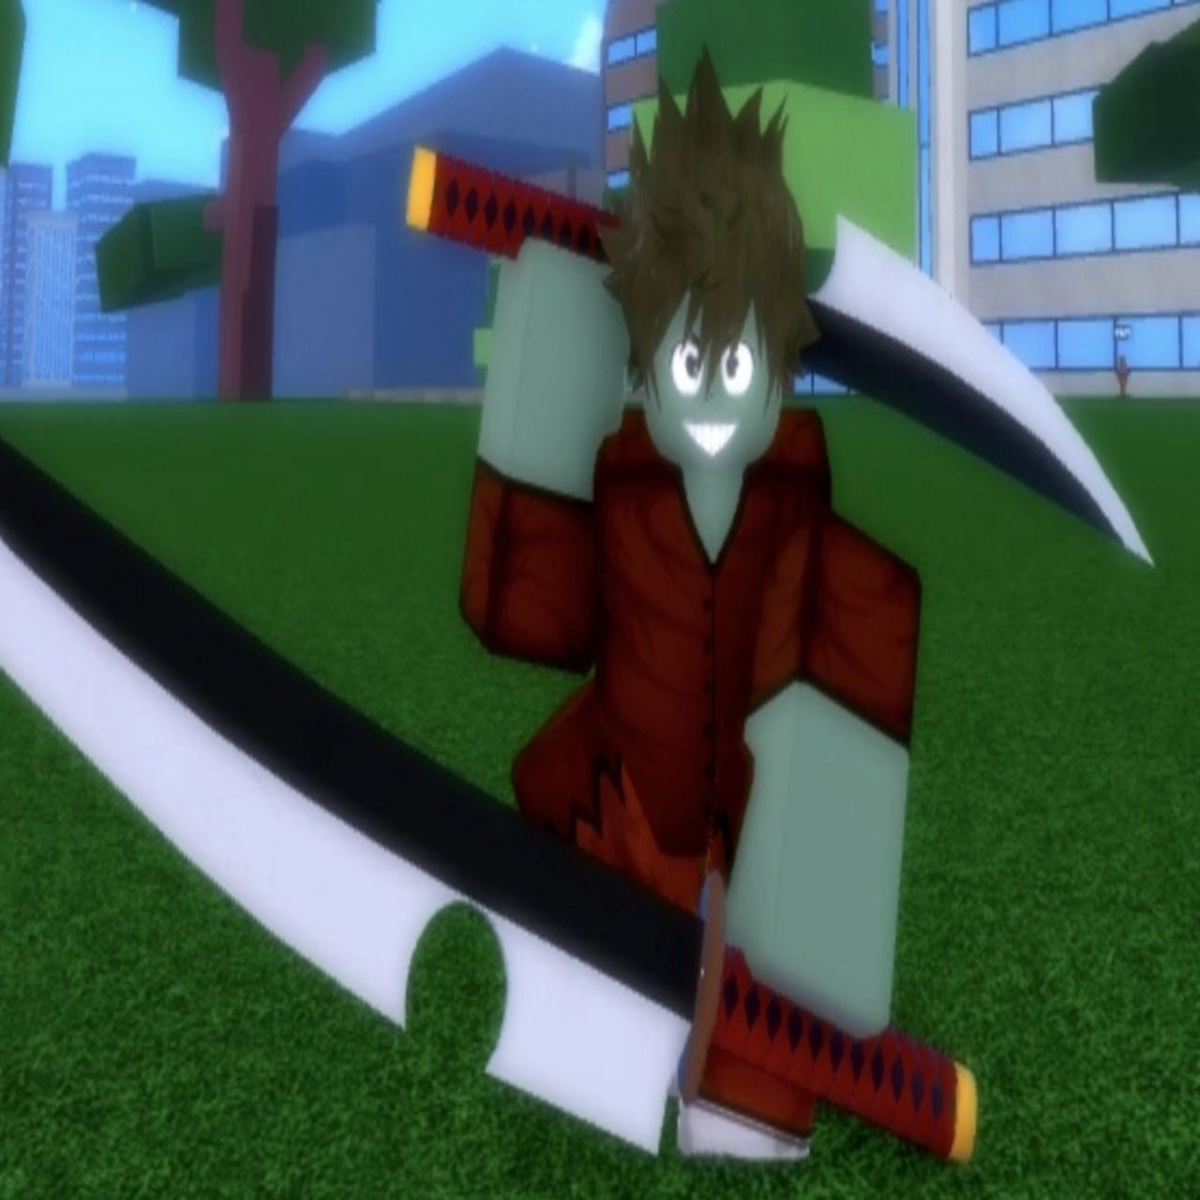 NEW* ALL WORKING CODES FOR PROJECT SLAYERS IN NOVEMBER 2022! ROBLOX PROJECT  SLAYERS CODES 